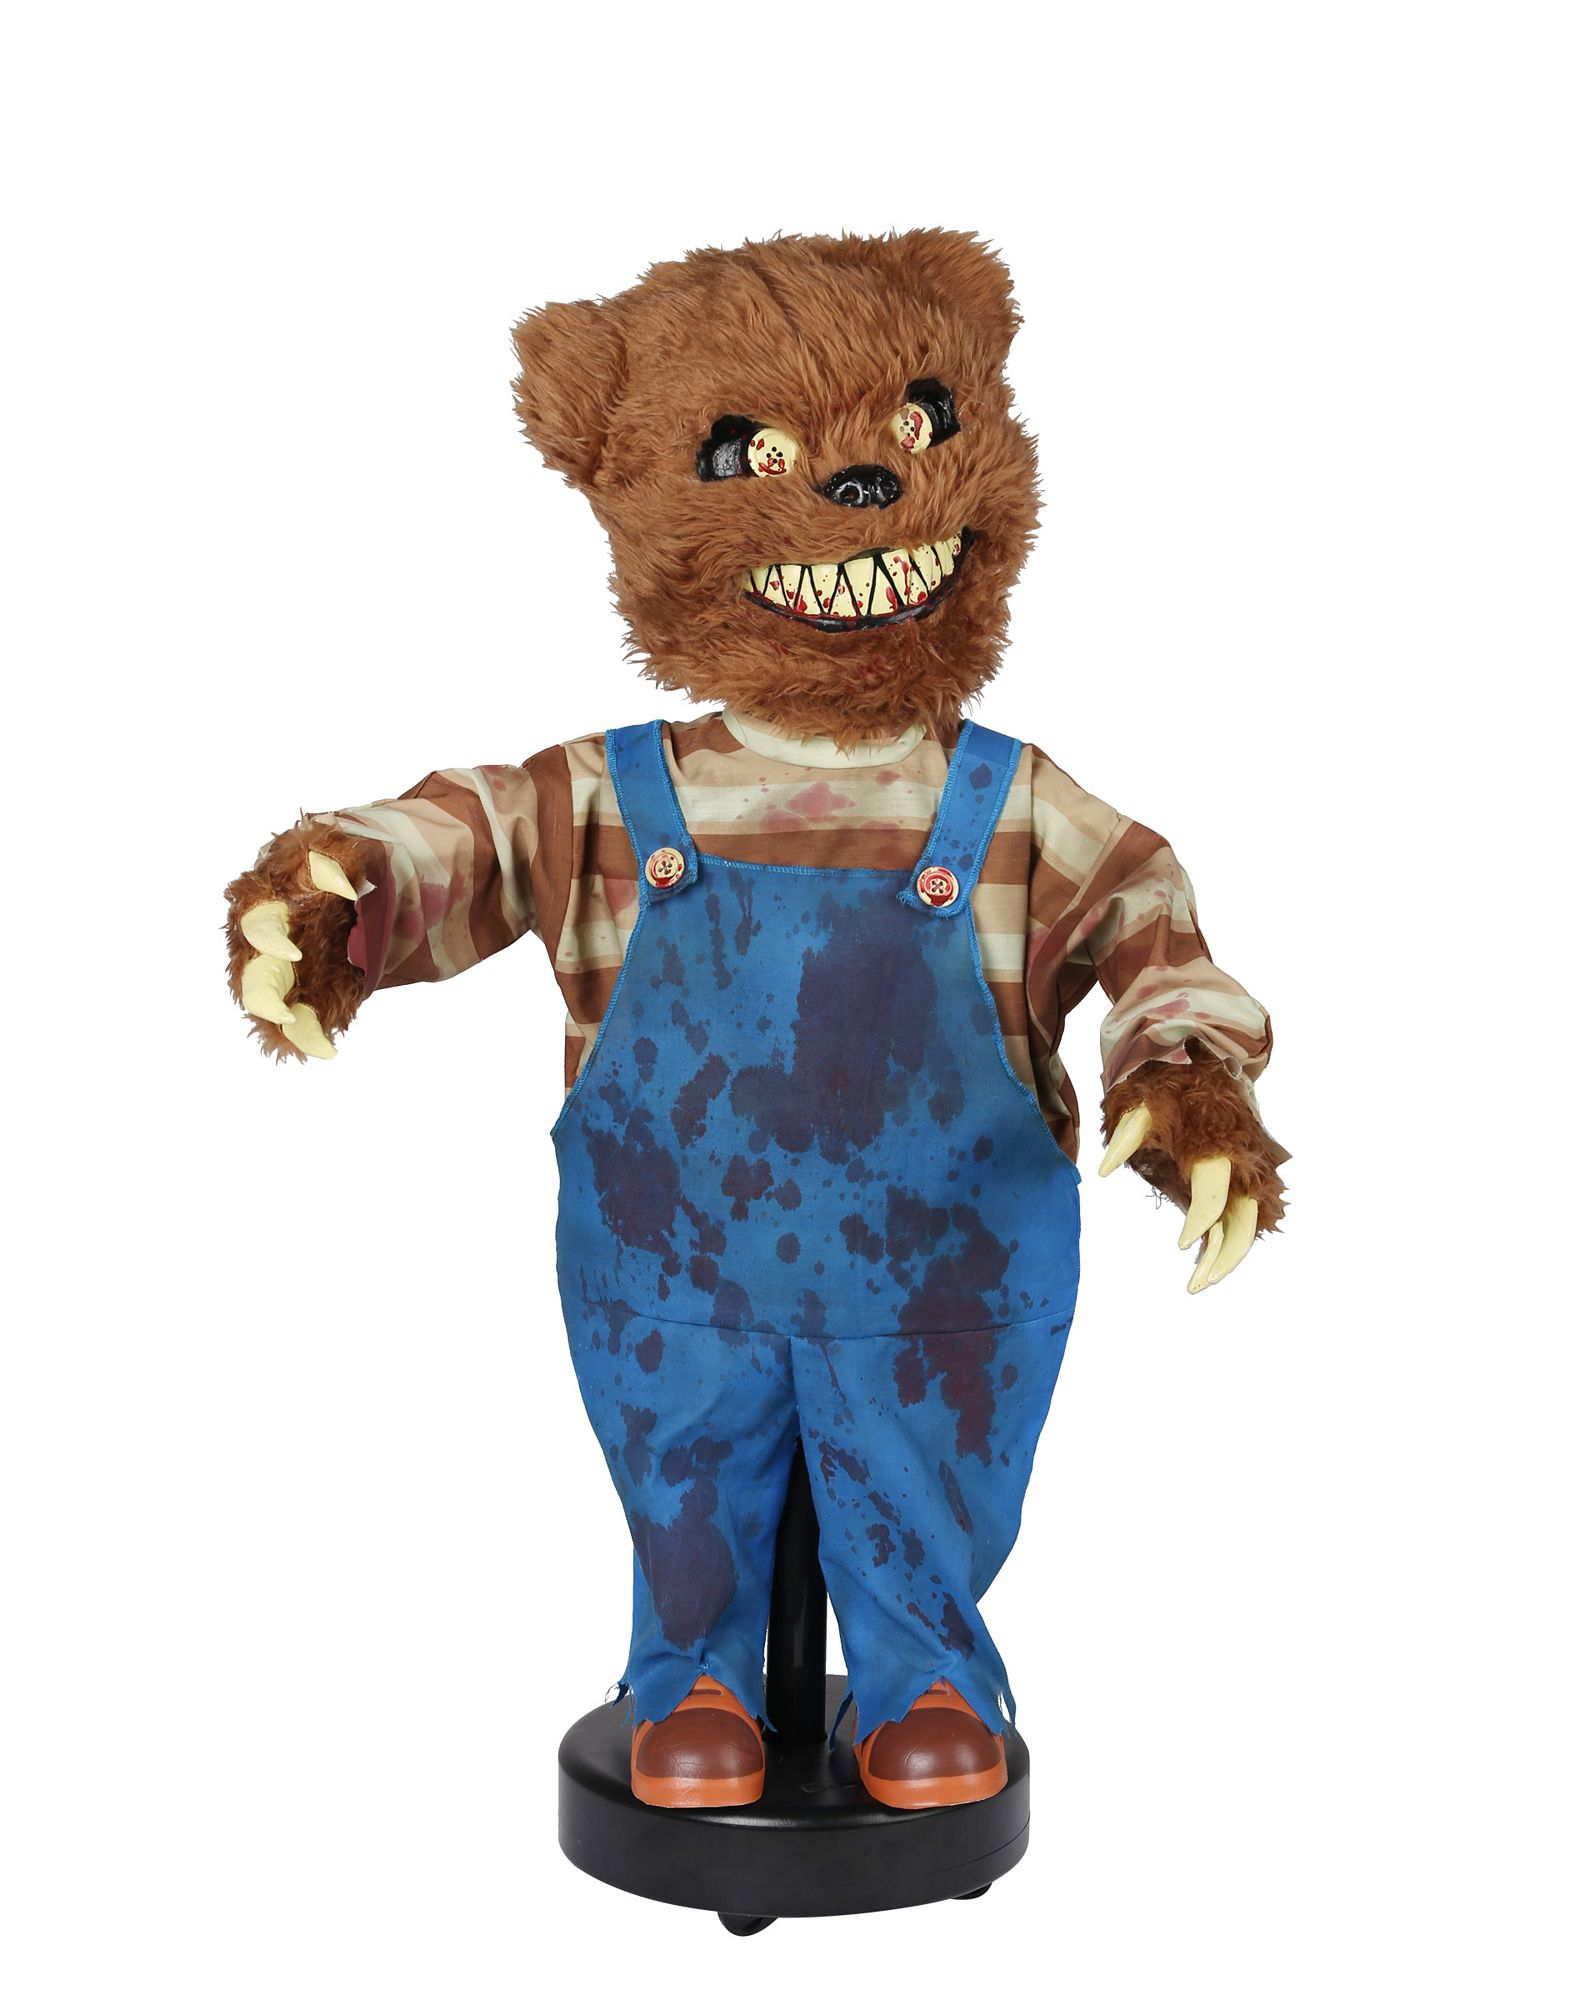 Evil Scary Teddy Bear Halloween Zombie Kids T-Shirt for Sale by